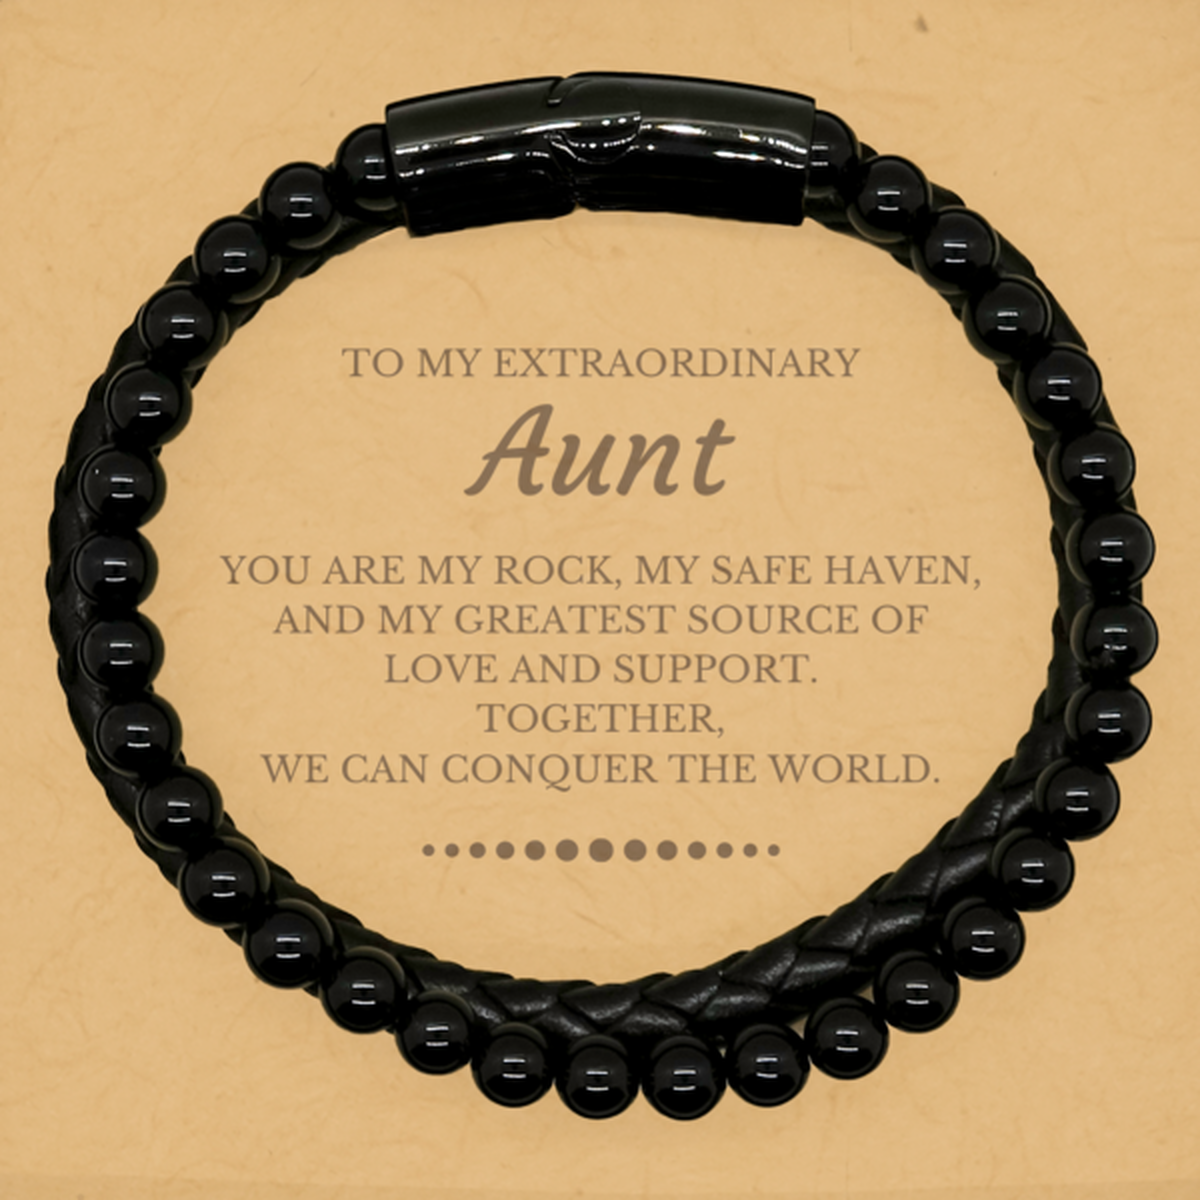 To My Extraordinary Aunt Gifts, Together, we can conquer the world, Birthday Stone Leather Bracelets For Aunt, Christmas Gifts For Aunt